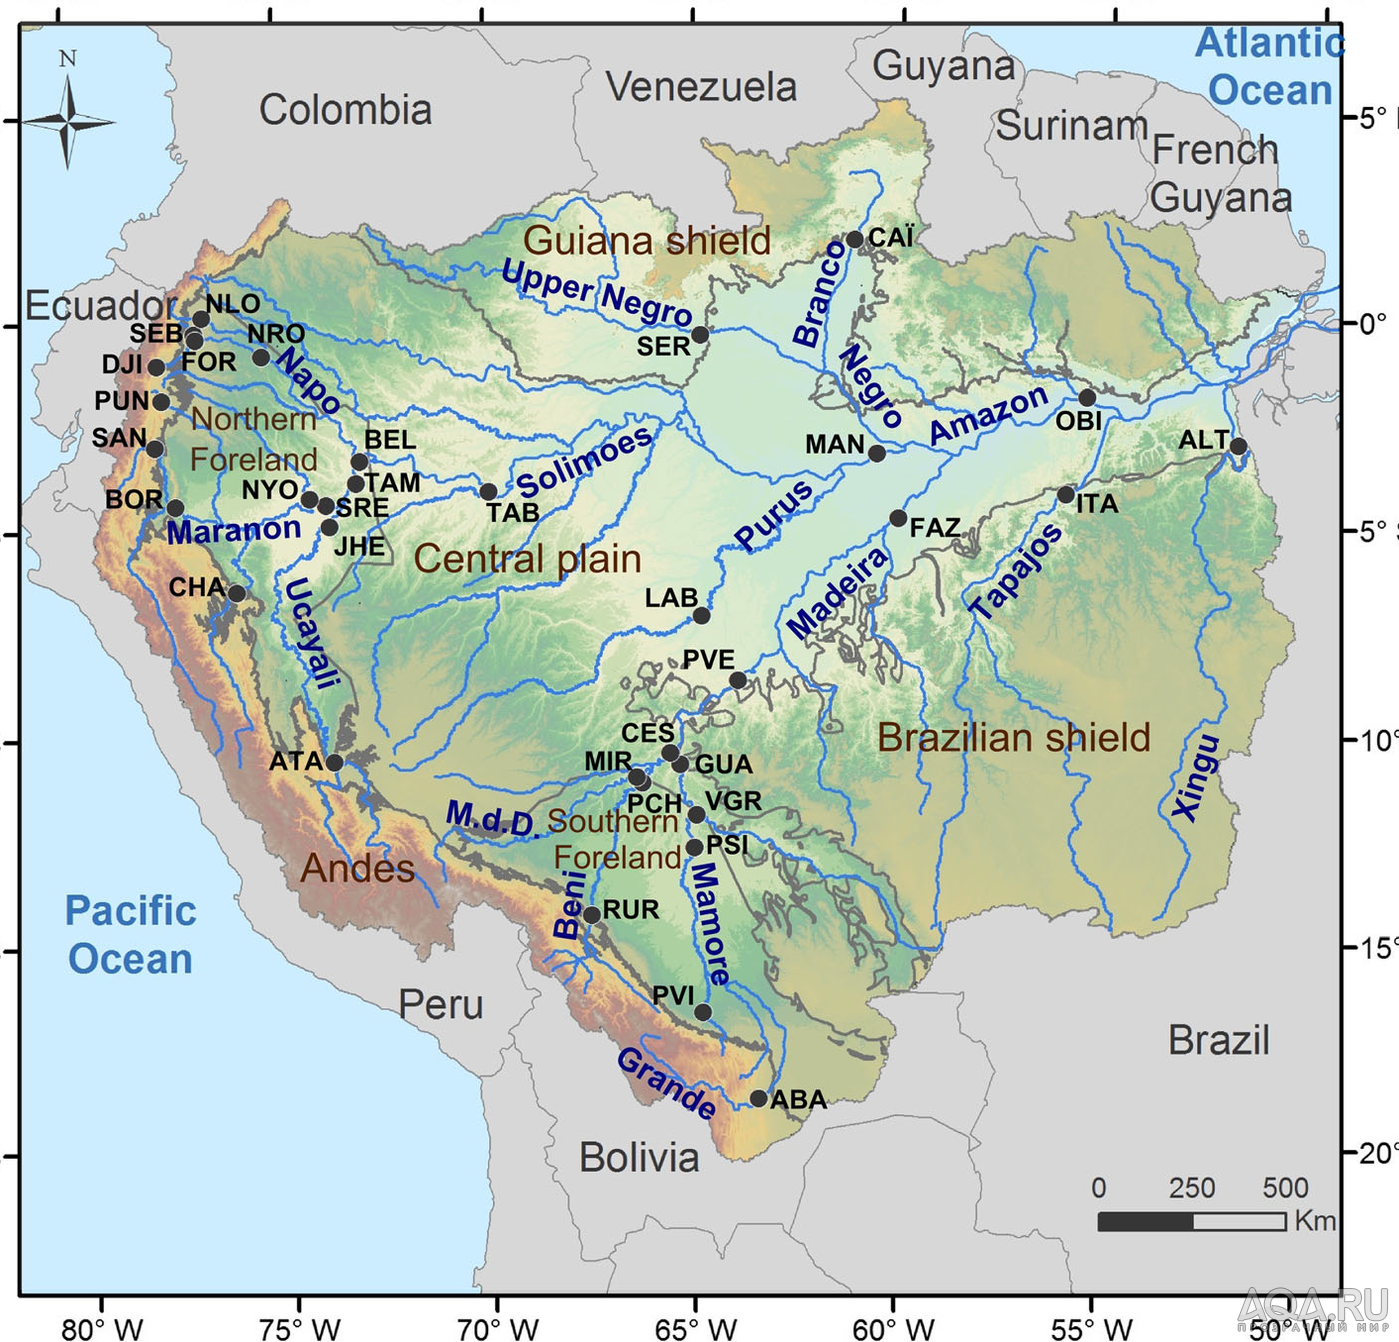 Amazon Flows from Andes to Atlantic